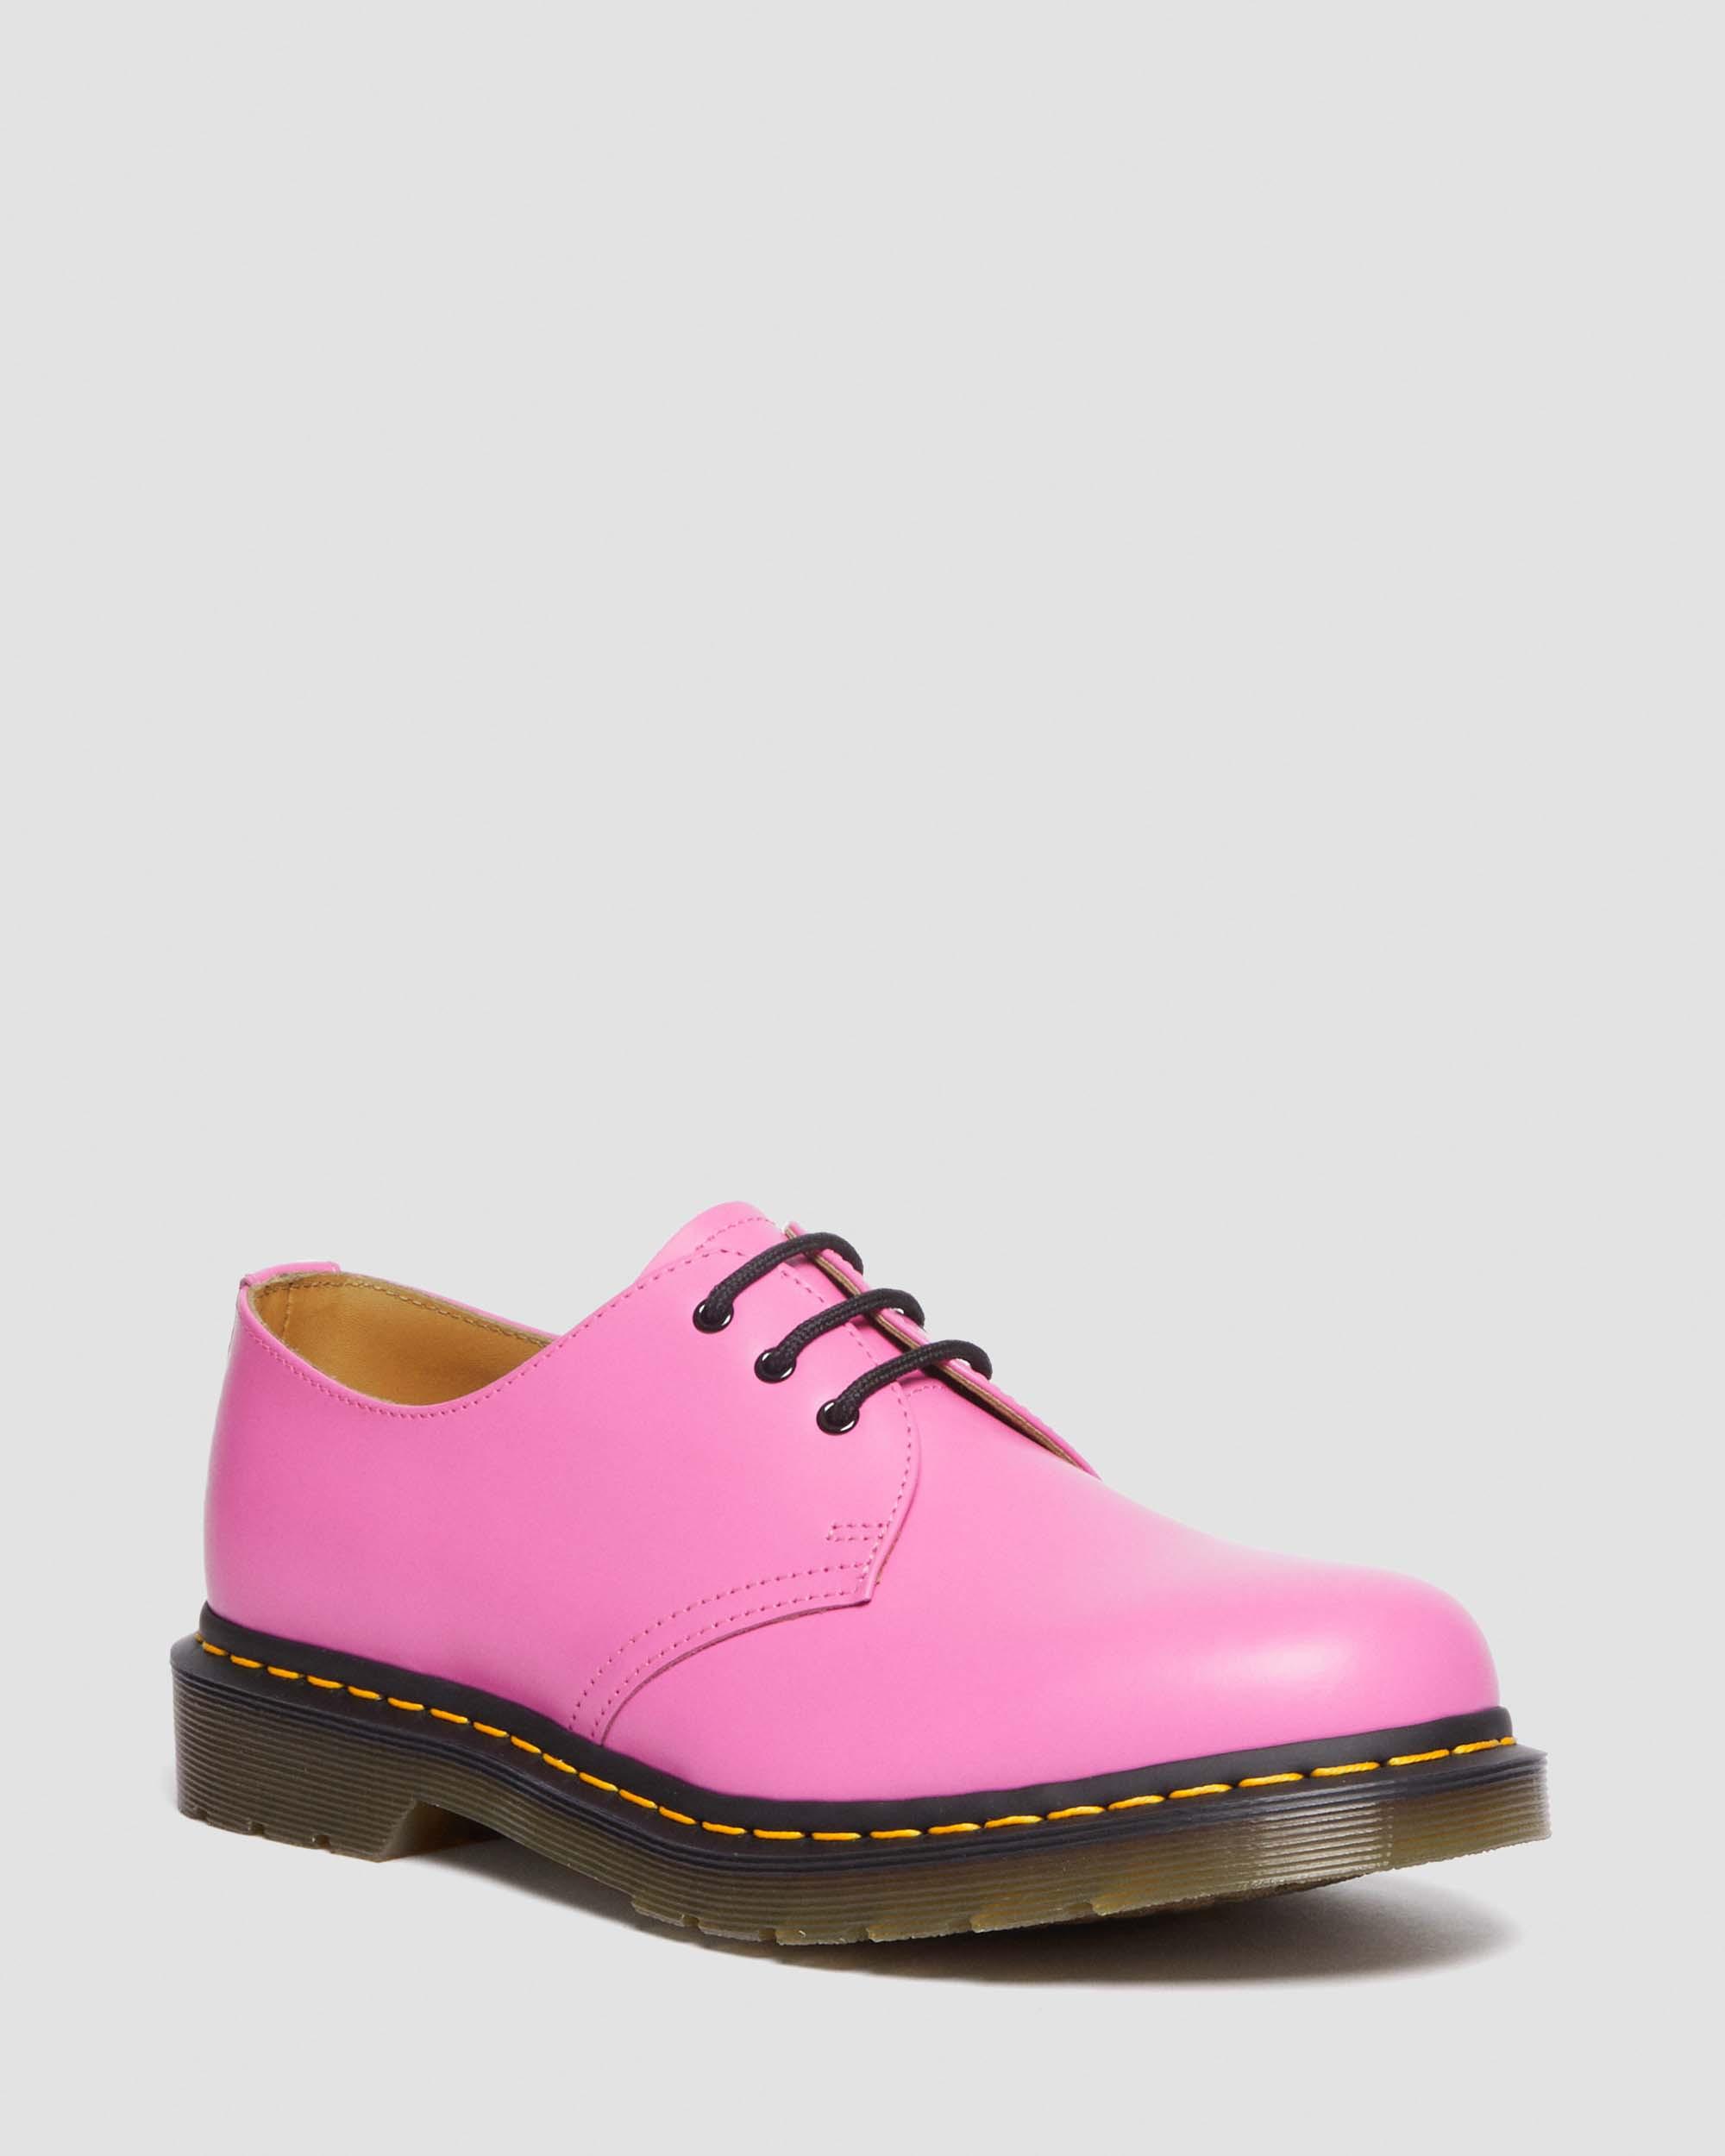 1461 Smooth Leather Oxford Shoes in Thrift Pink | Dr. Martens